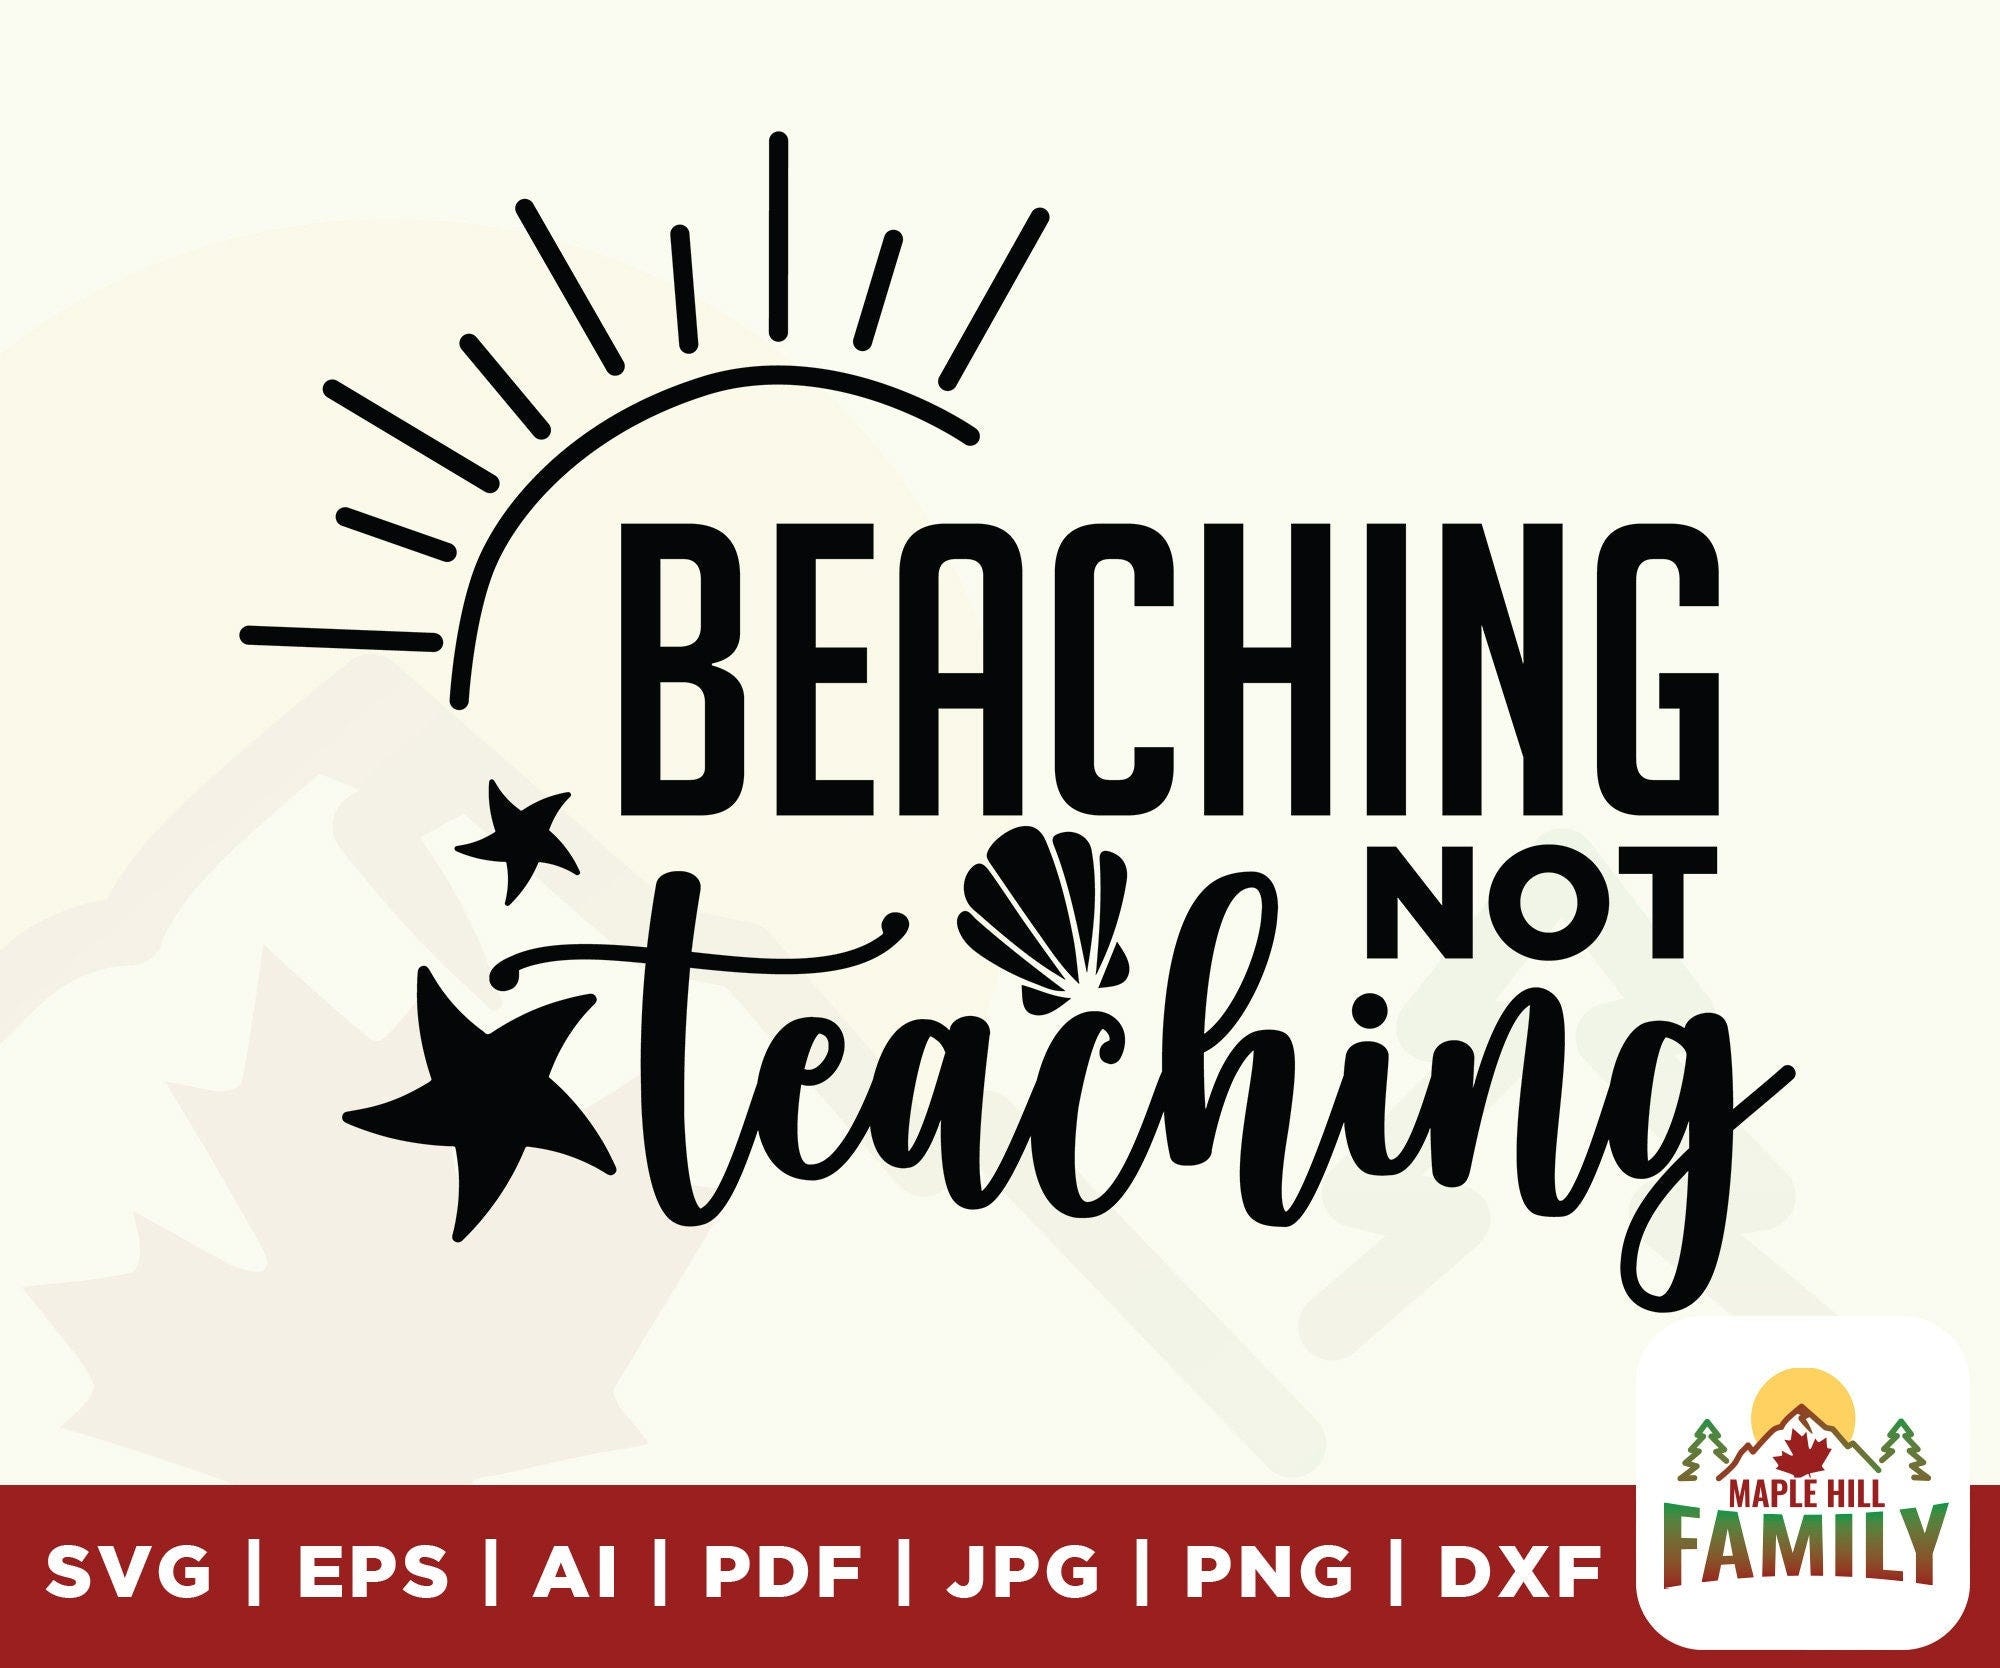 Beaching not teaching svg, summer vacation svg, Funny teacher vacation svg, Schools out svg, Instant Download, Files for cricut, sublimation